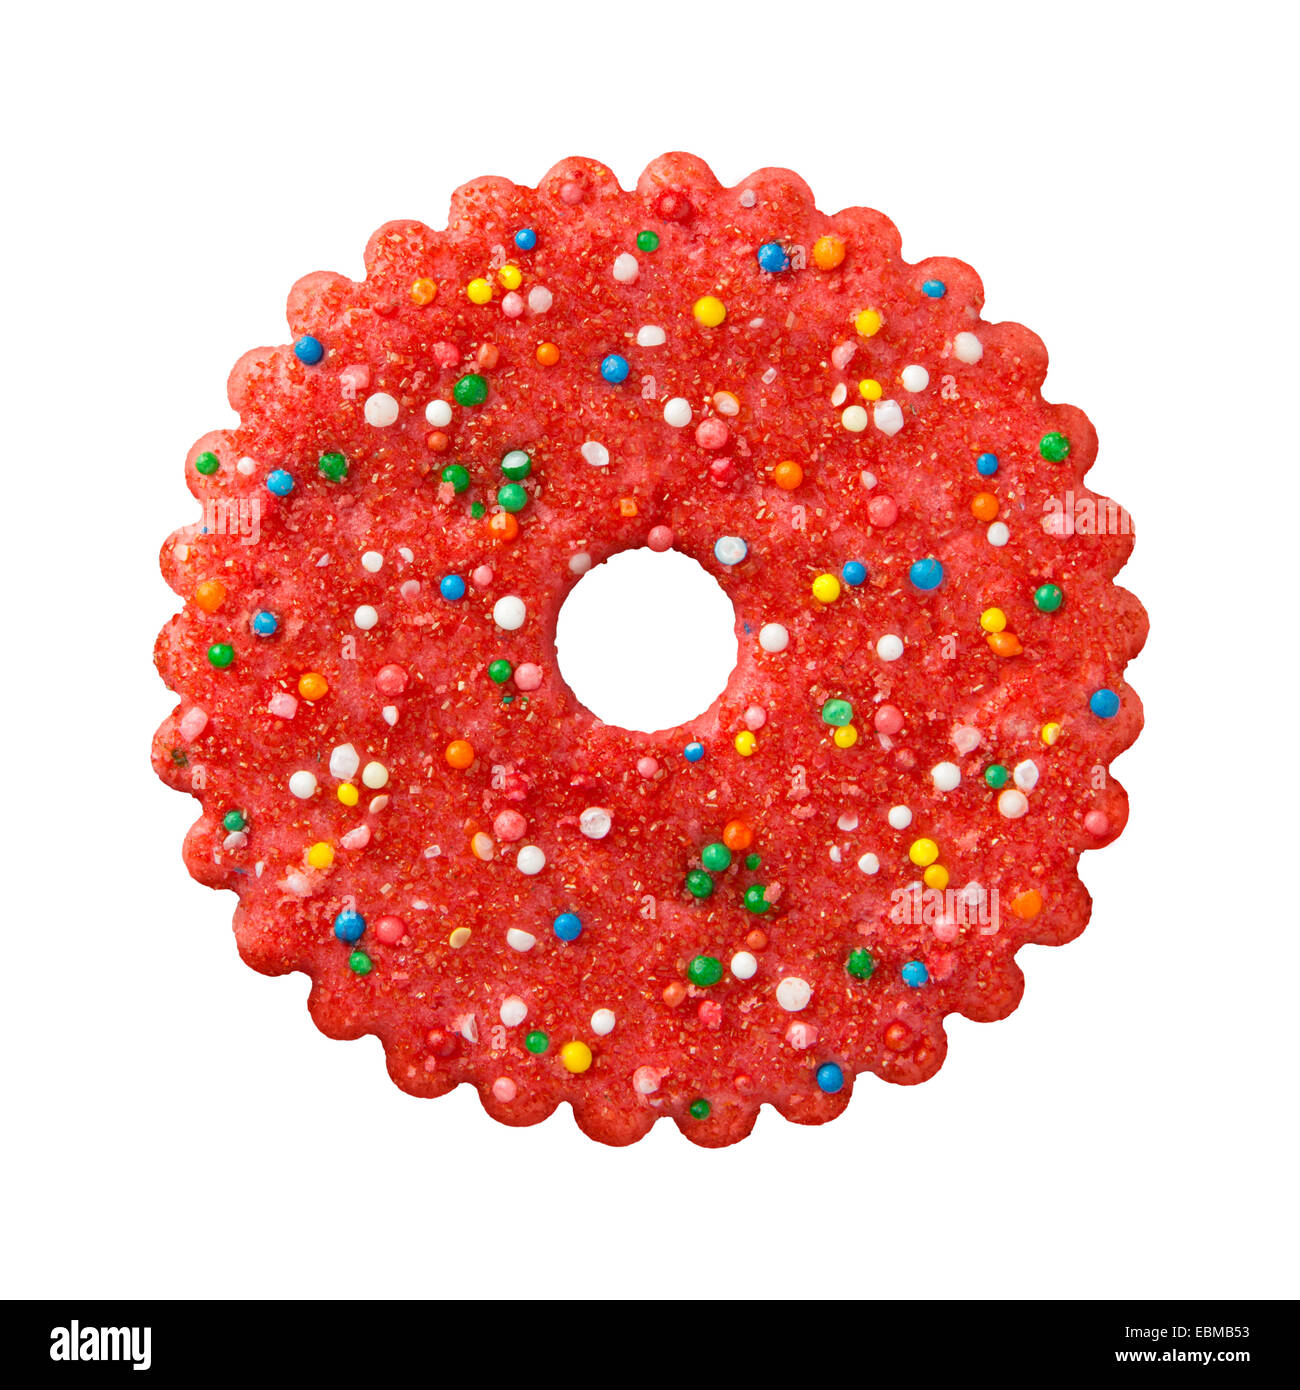 Round Red Christmas Cookie Stock Photo